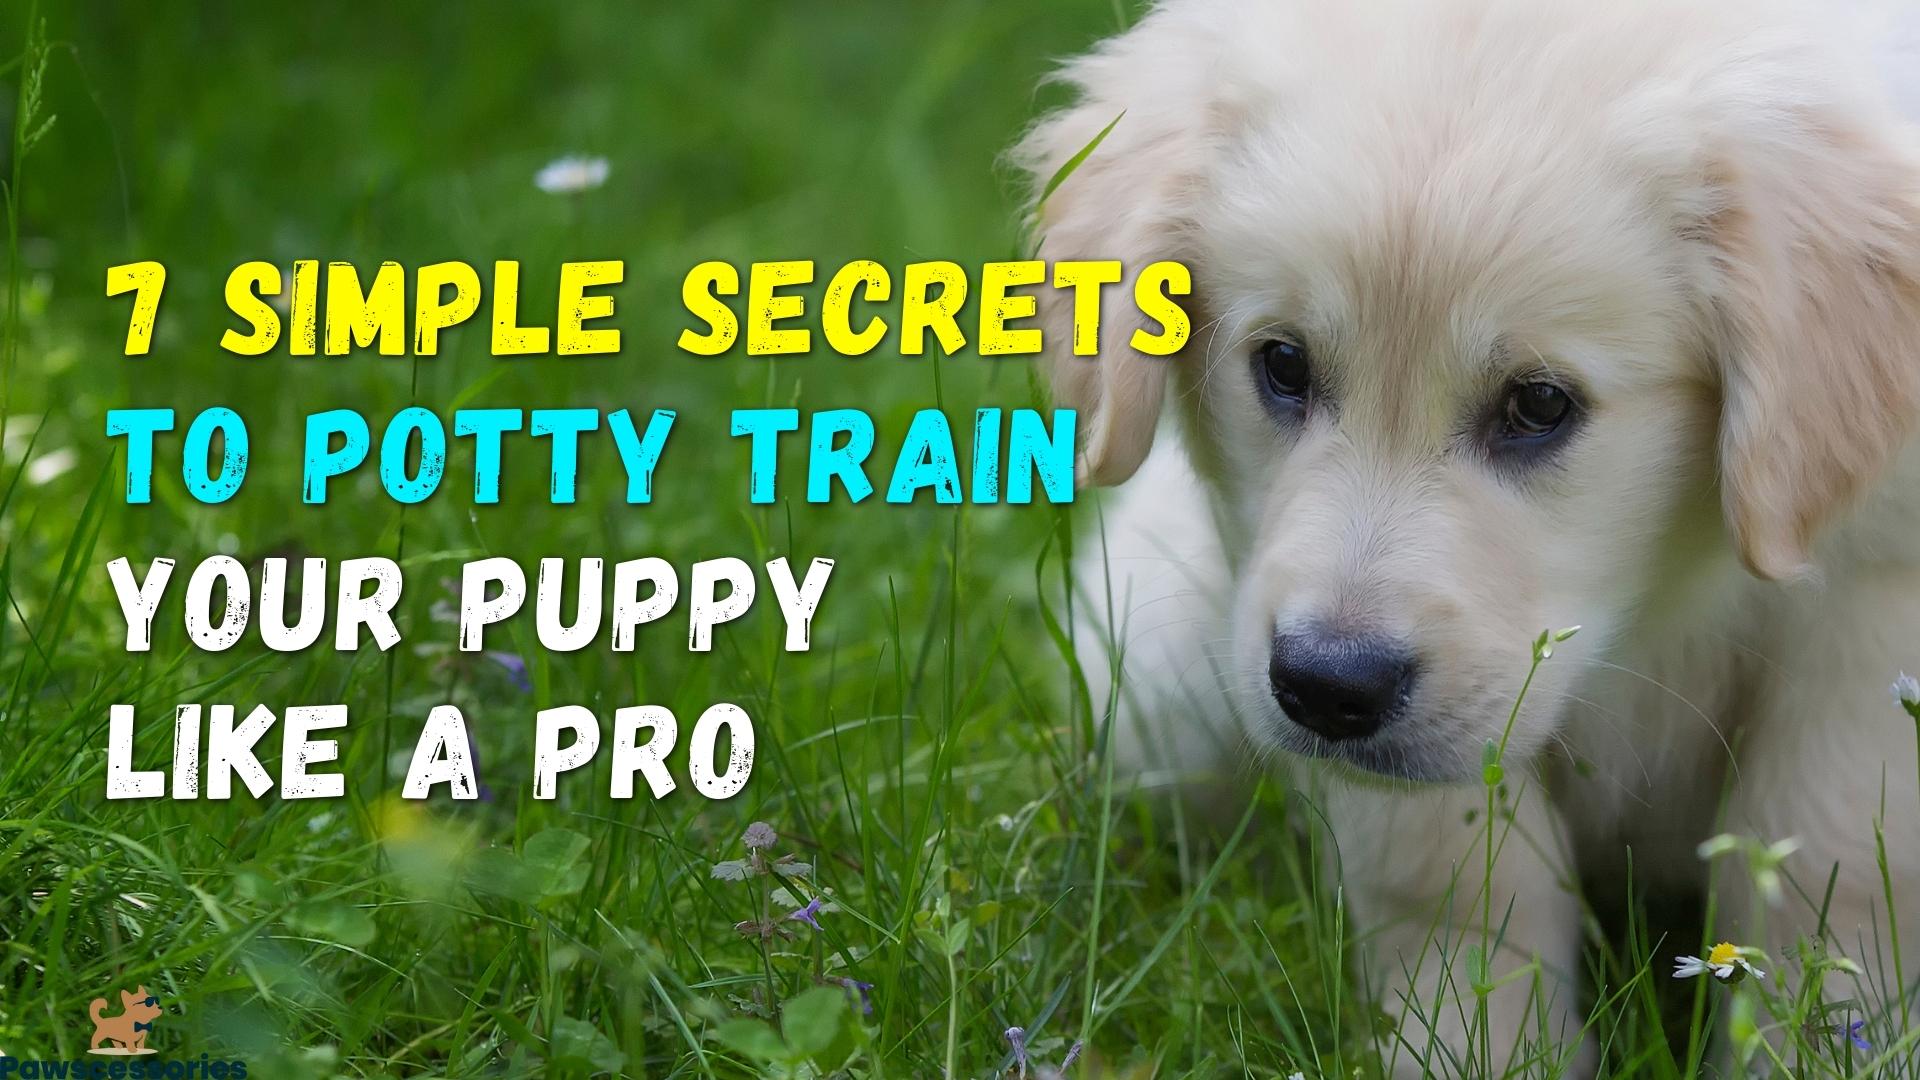 7 Simple Secrets To Potty Train Your Puppy Like A Pro